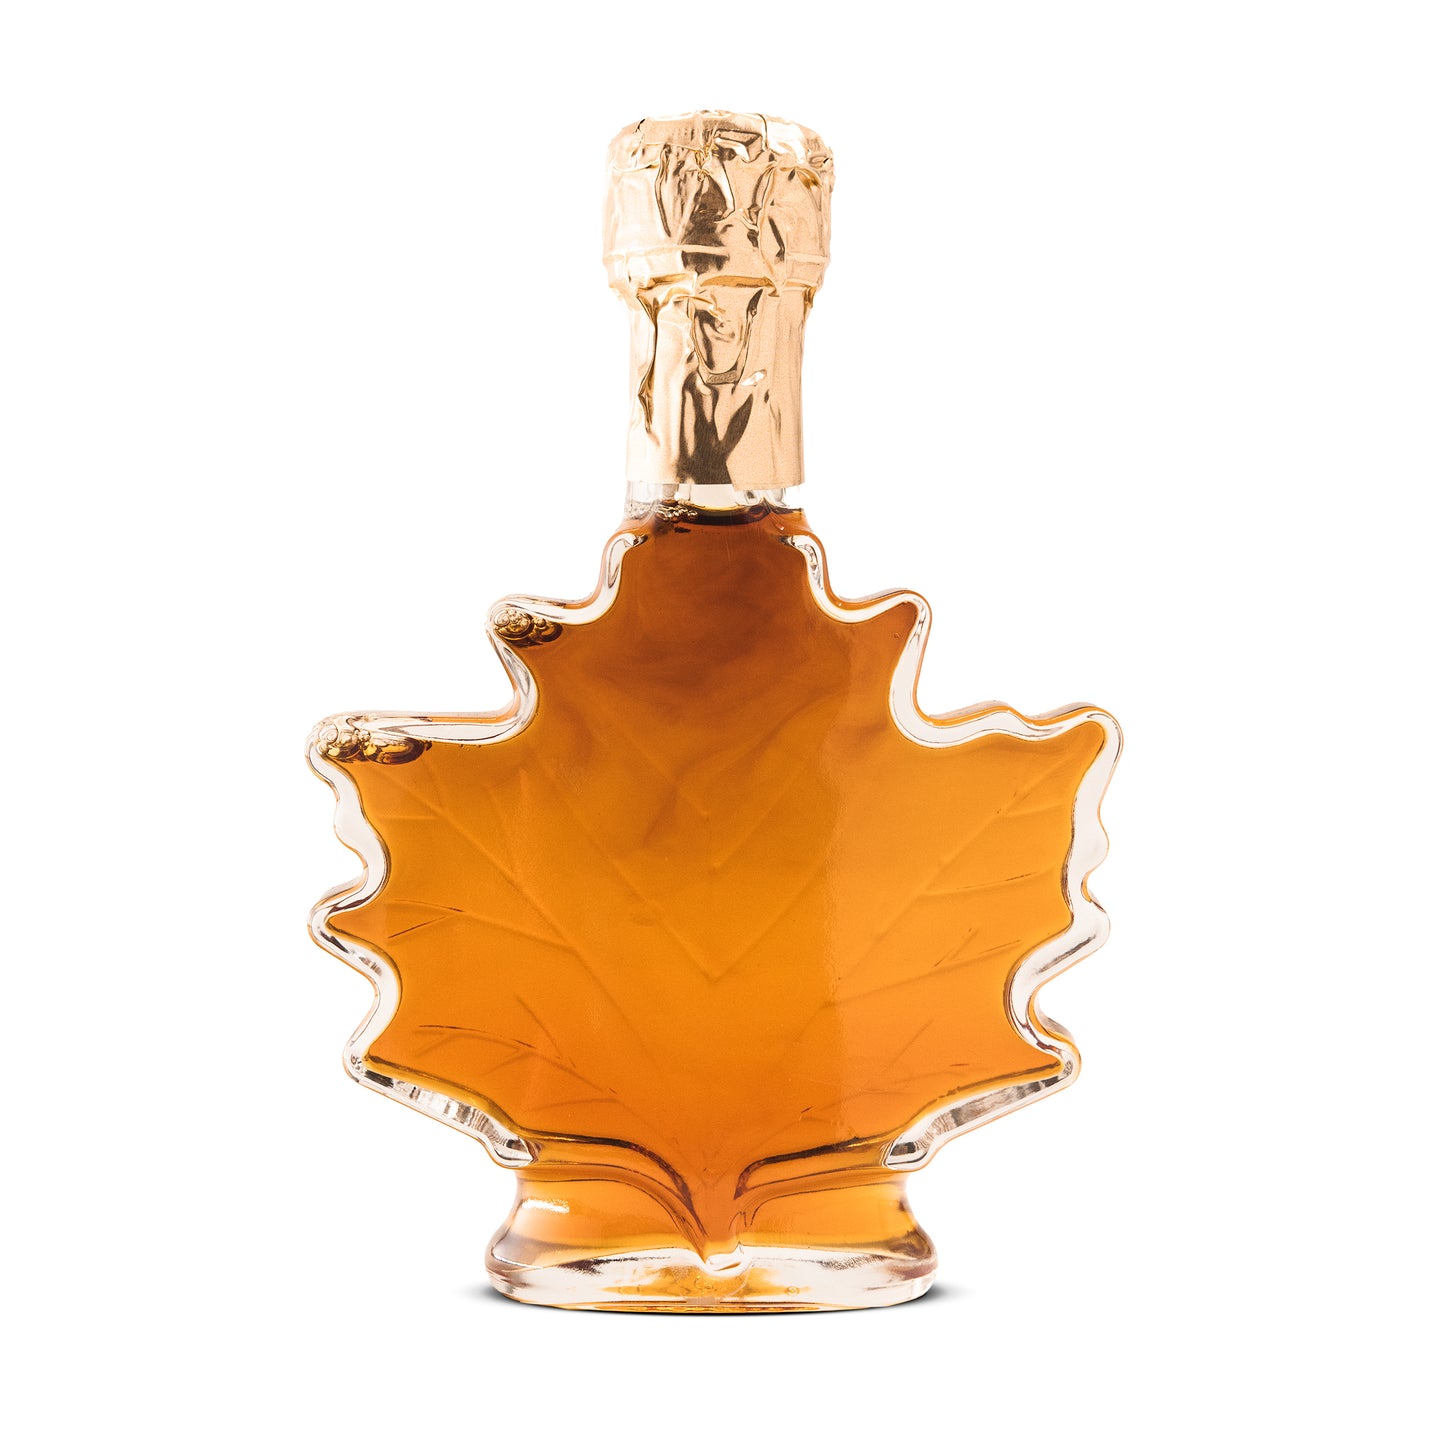 Pure Maple Syrup Favors - Glass Leaf Bottle - 3.4 oz